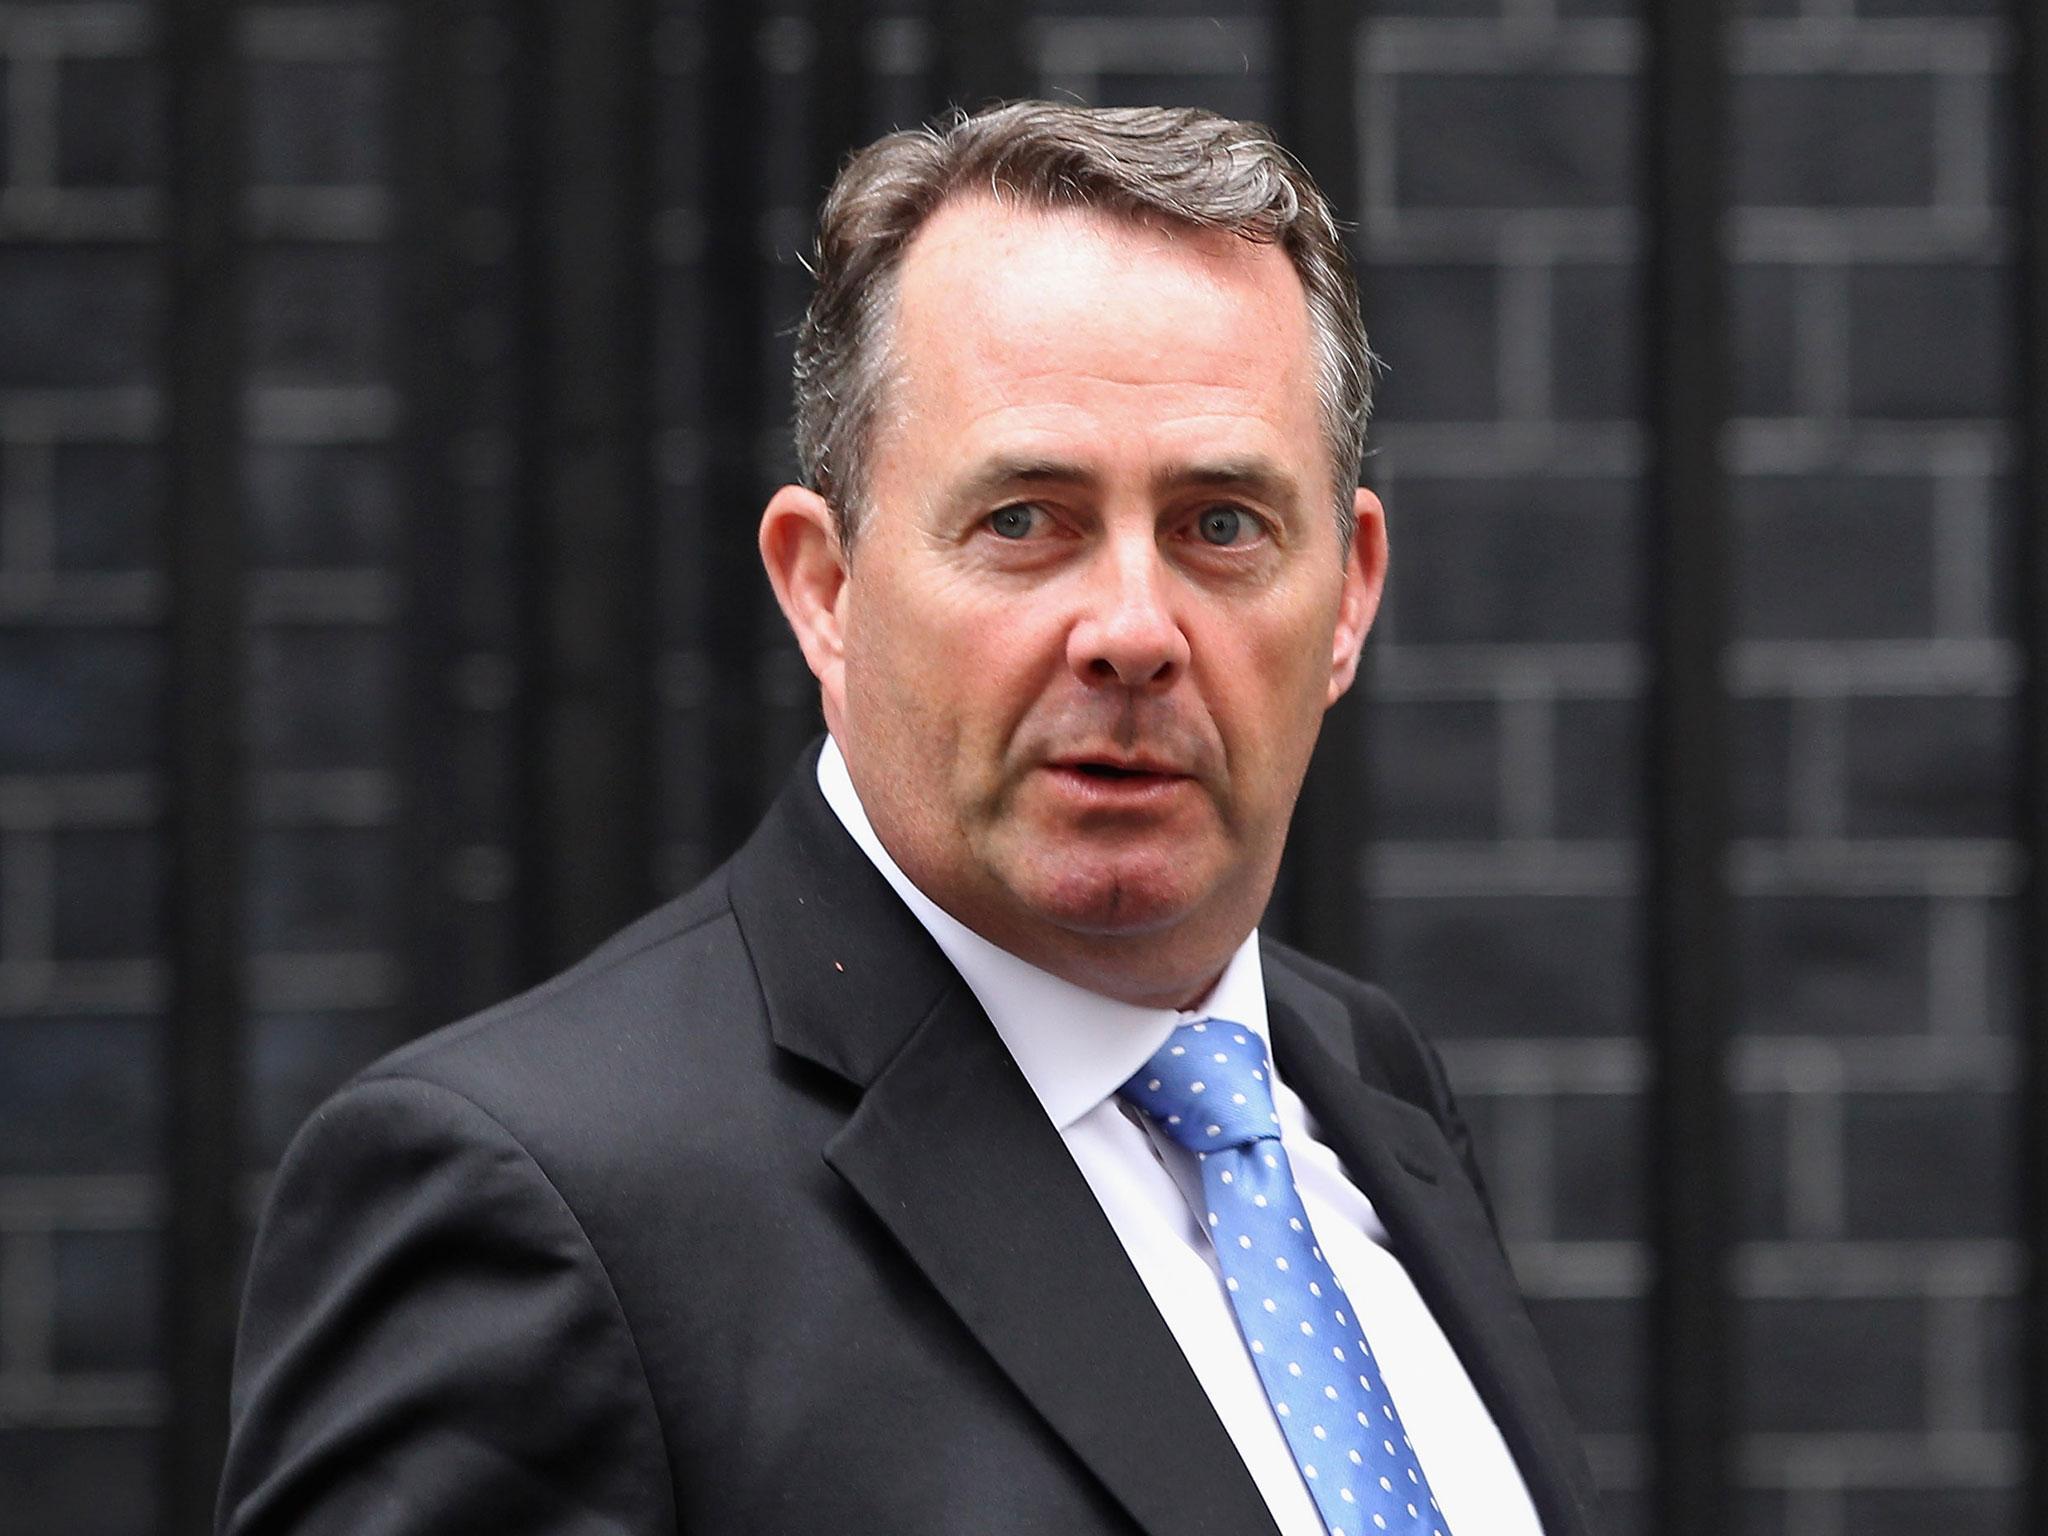 Dr Liam Fox, Conservative MP for North Somerset